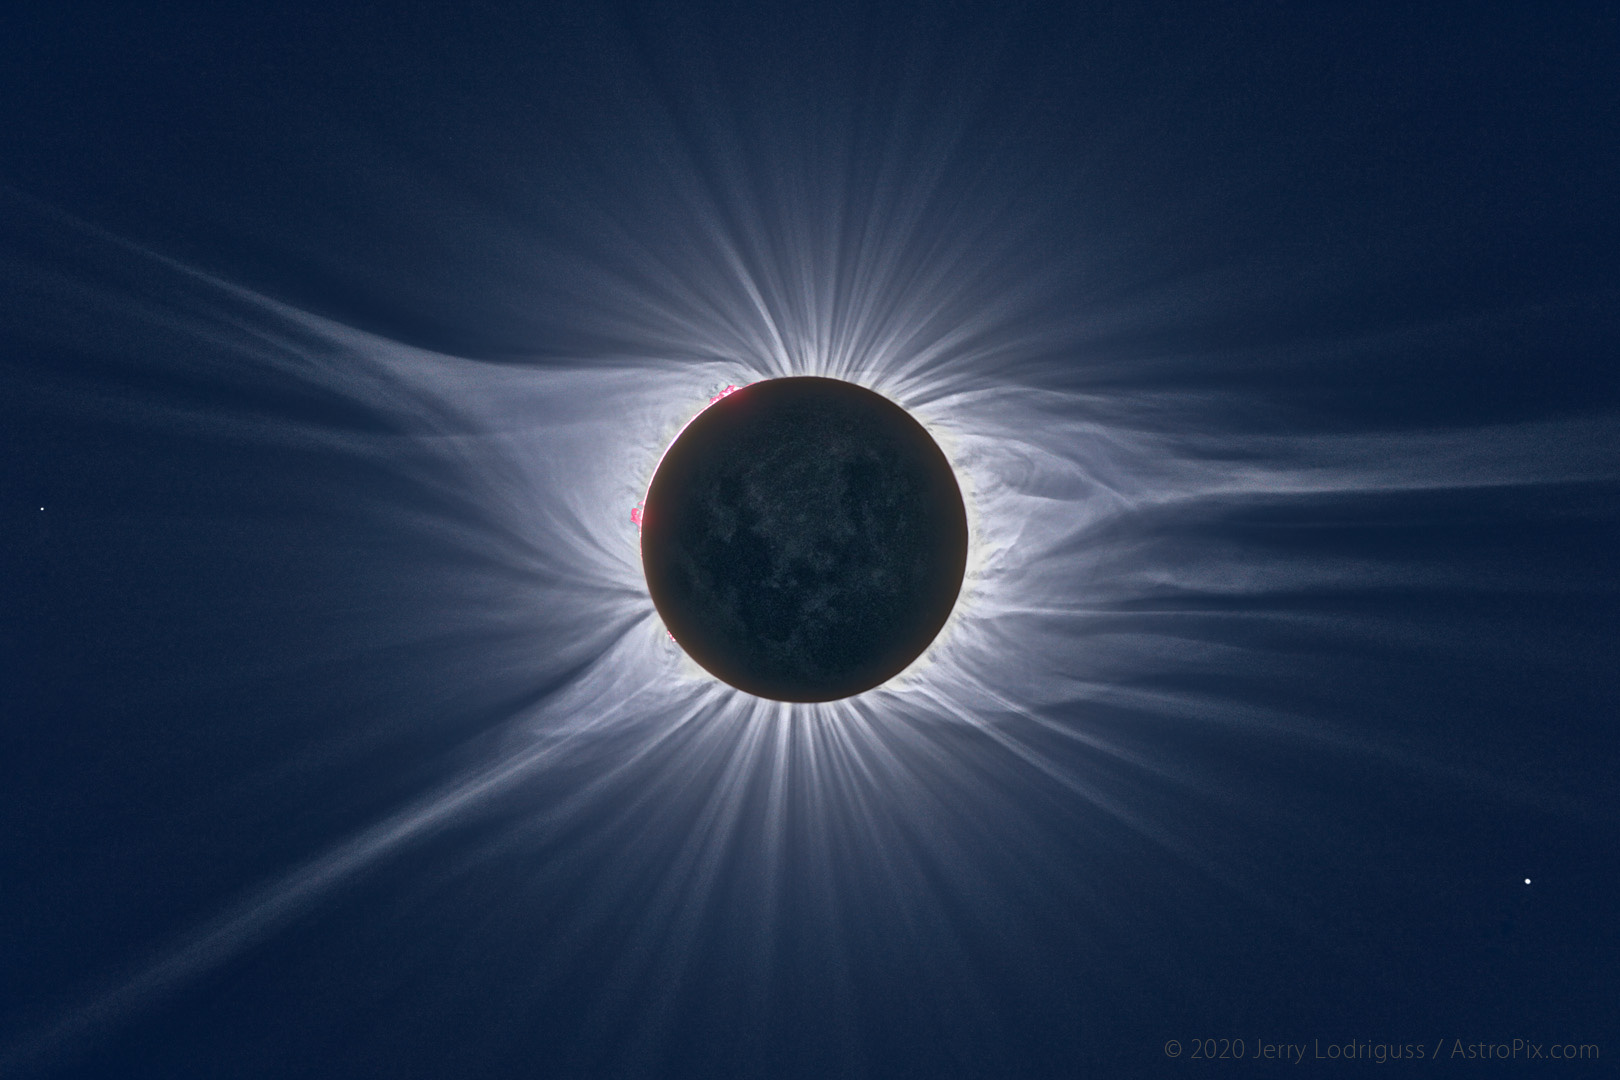 The subtle and ethereal beauty of the corona, the Sun's outer atmosphere, is seen in a High-Dynamic-Range composite image of the total solar eclipse on August 21, 2017 from Bandit Springs, Oregon in the United States.